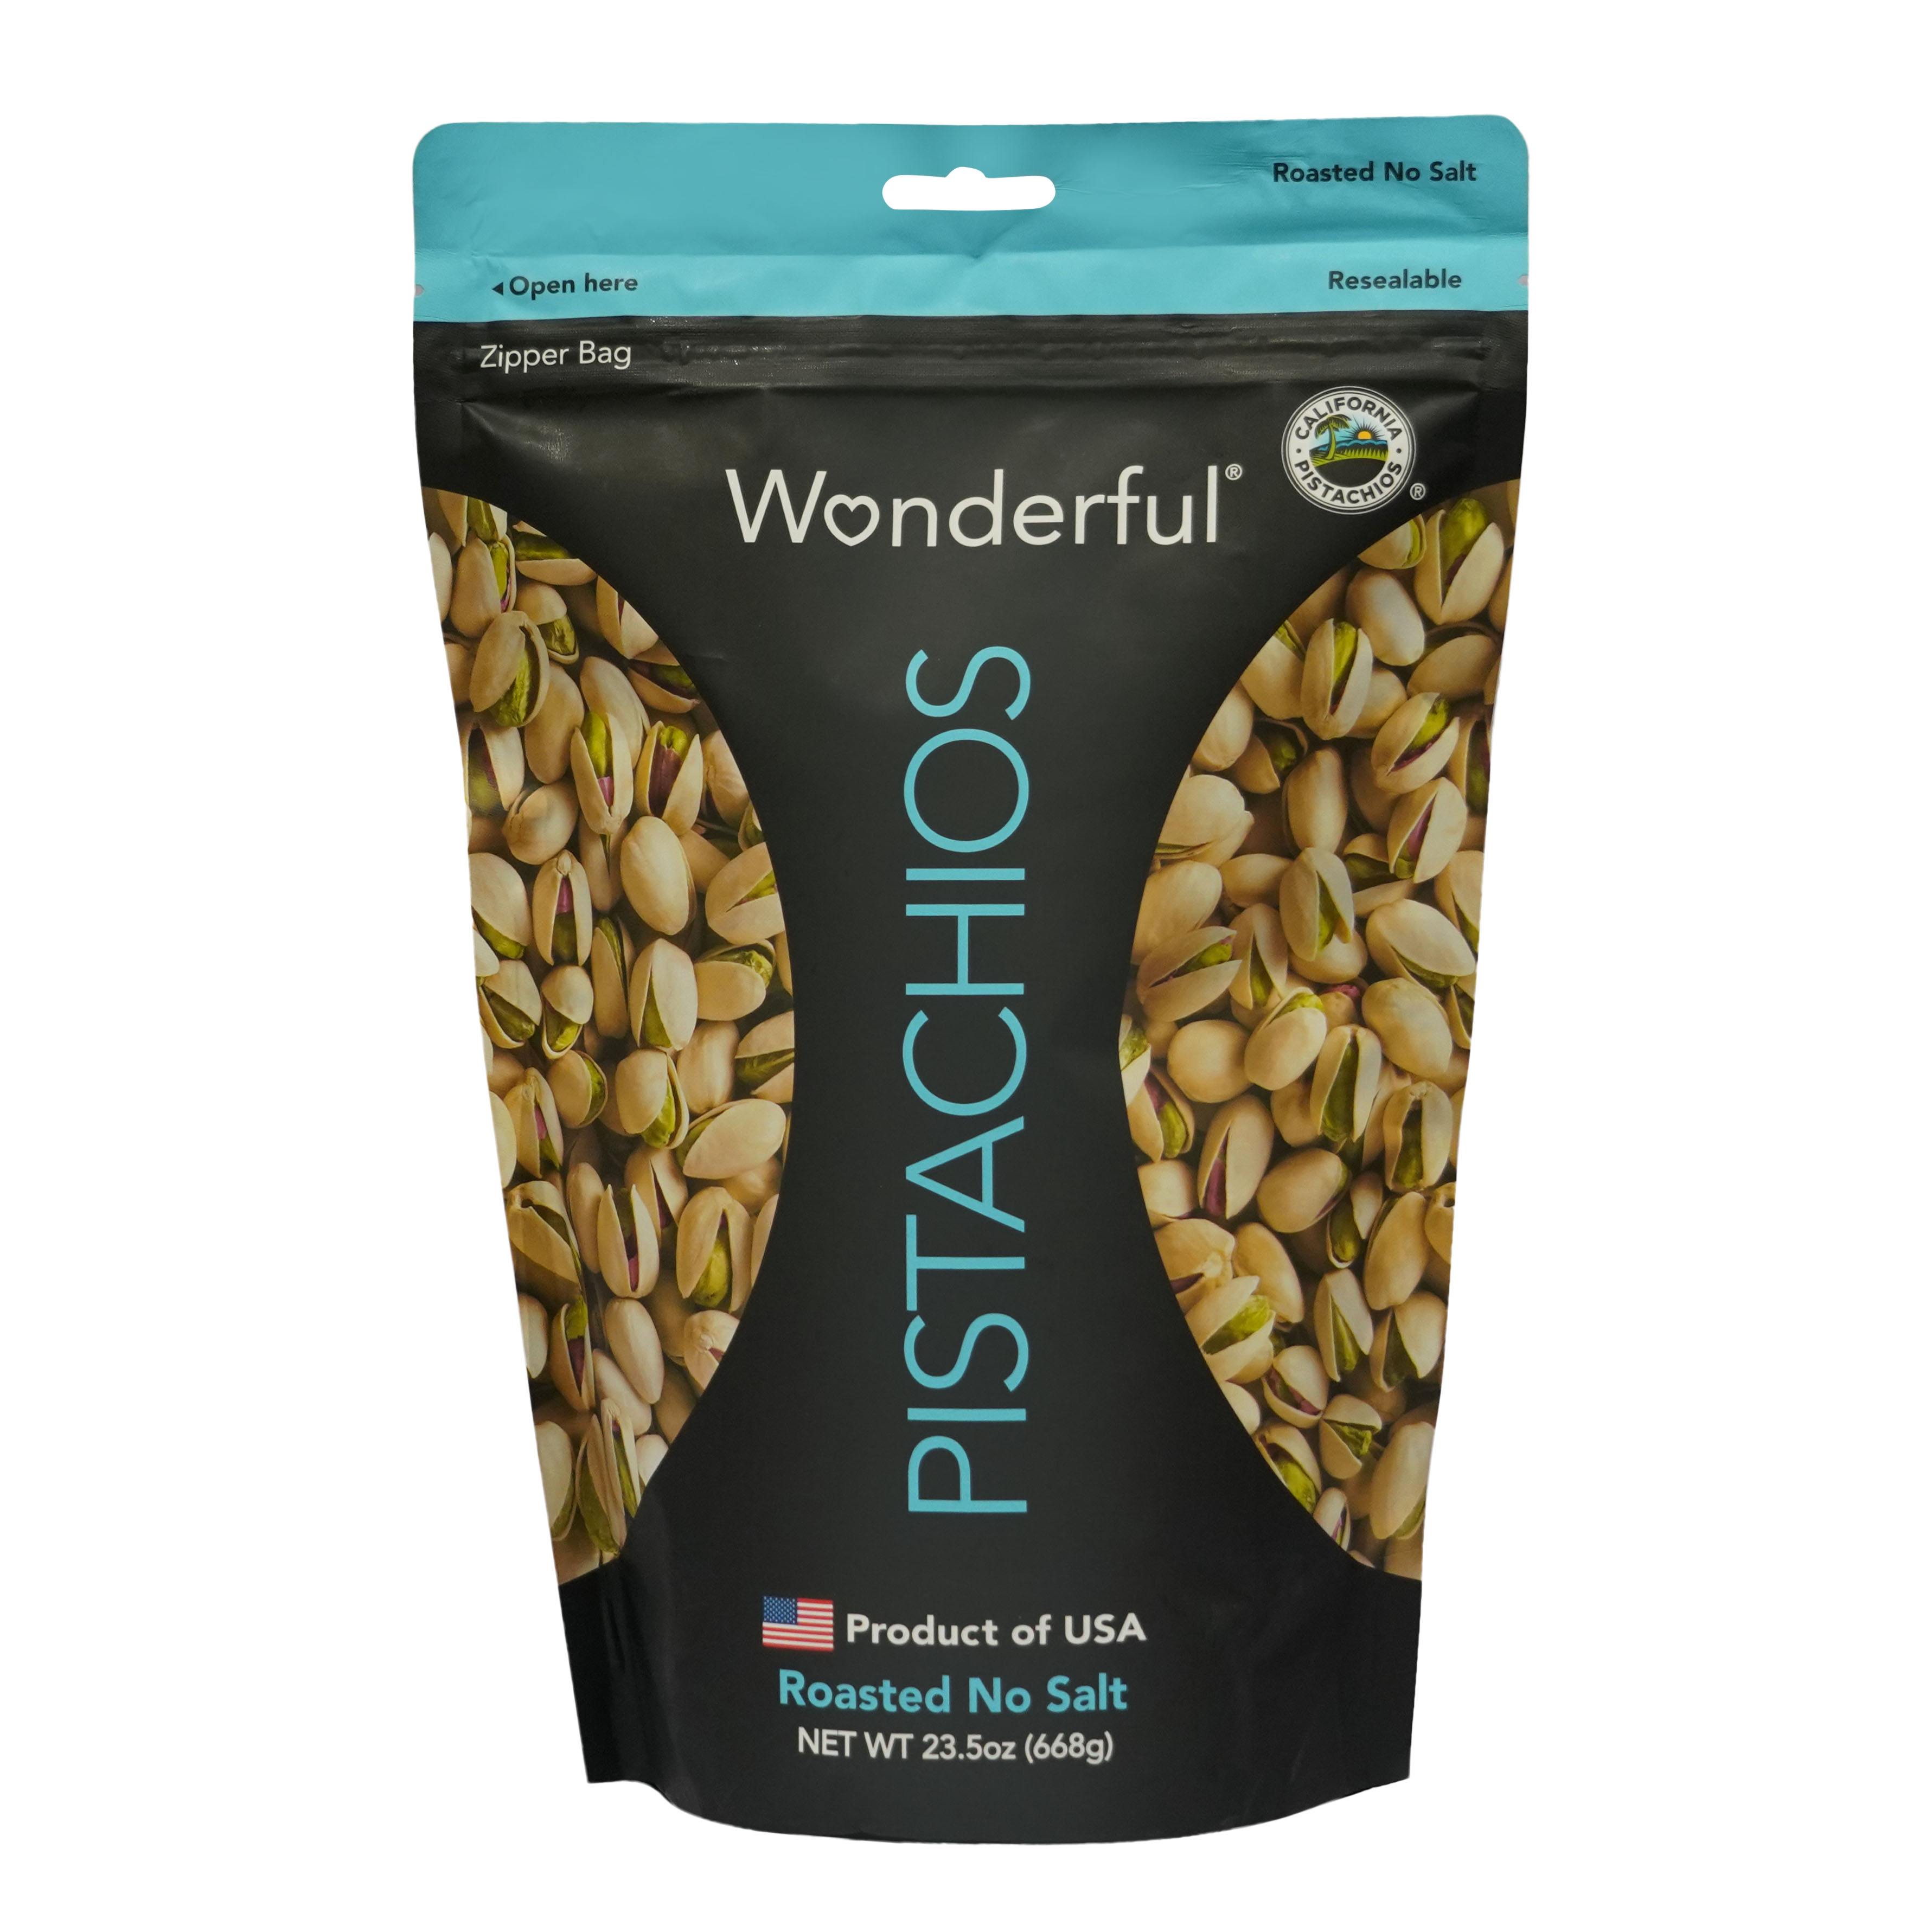 Wonderful Roasted Unsalted Pistachios (668g)